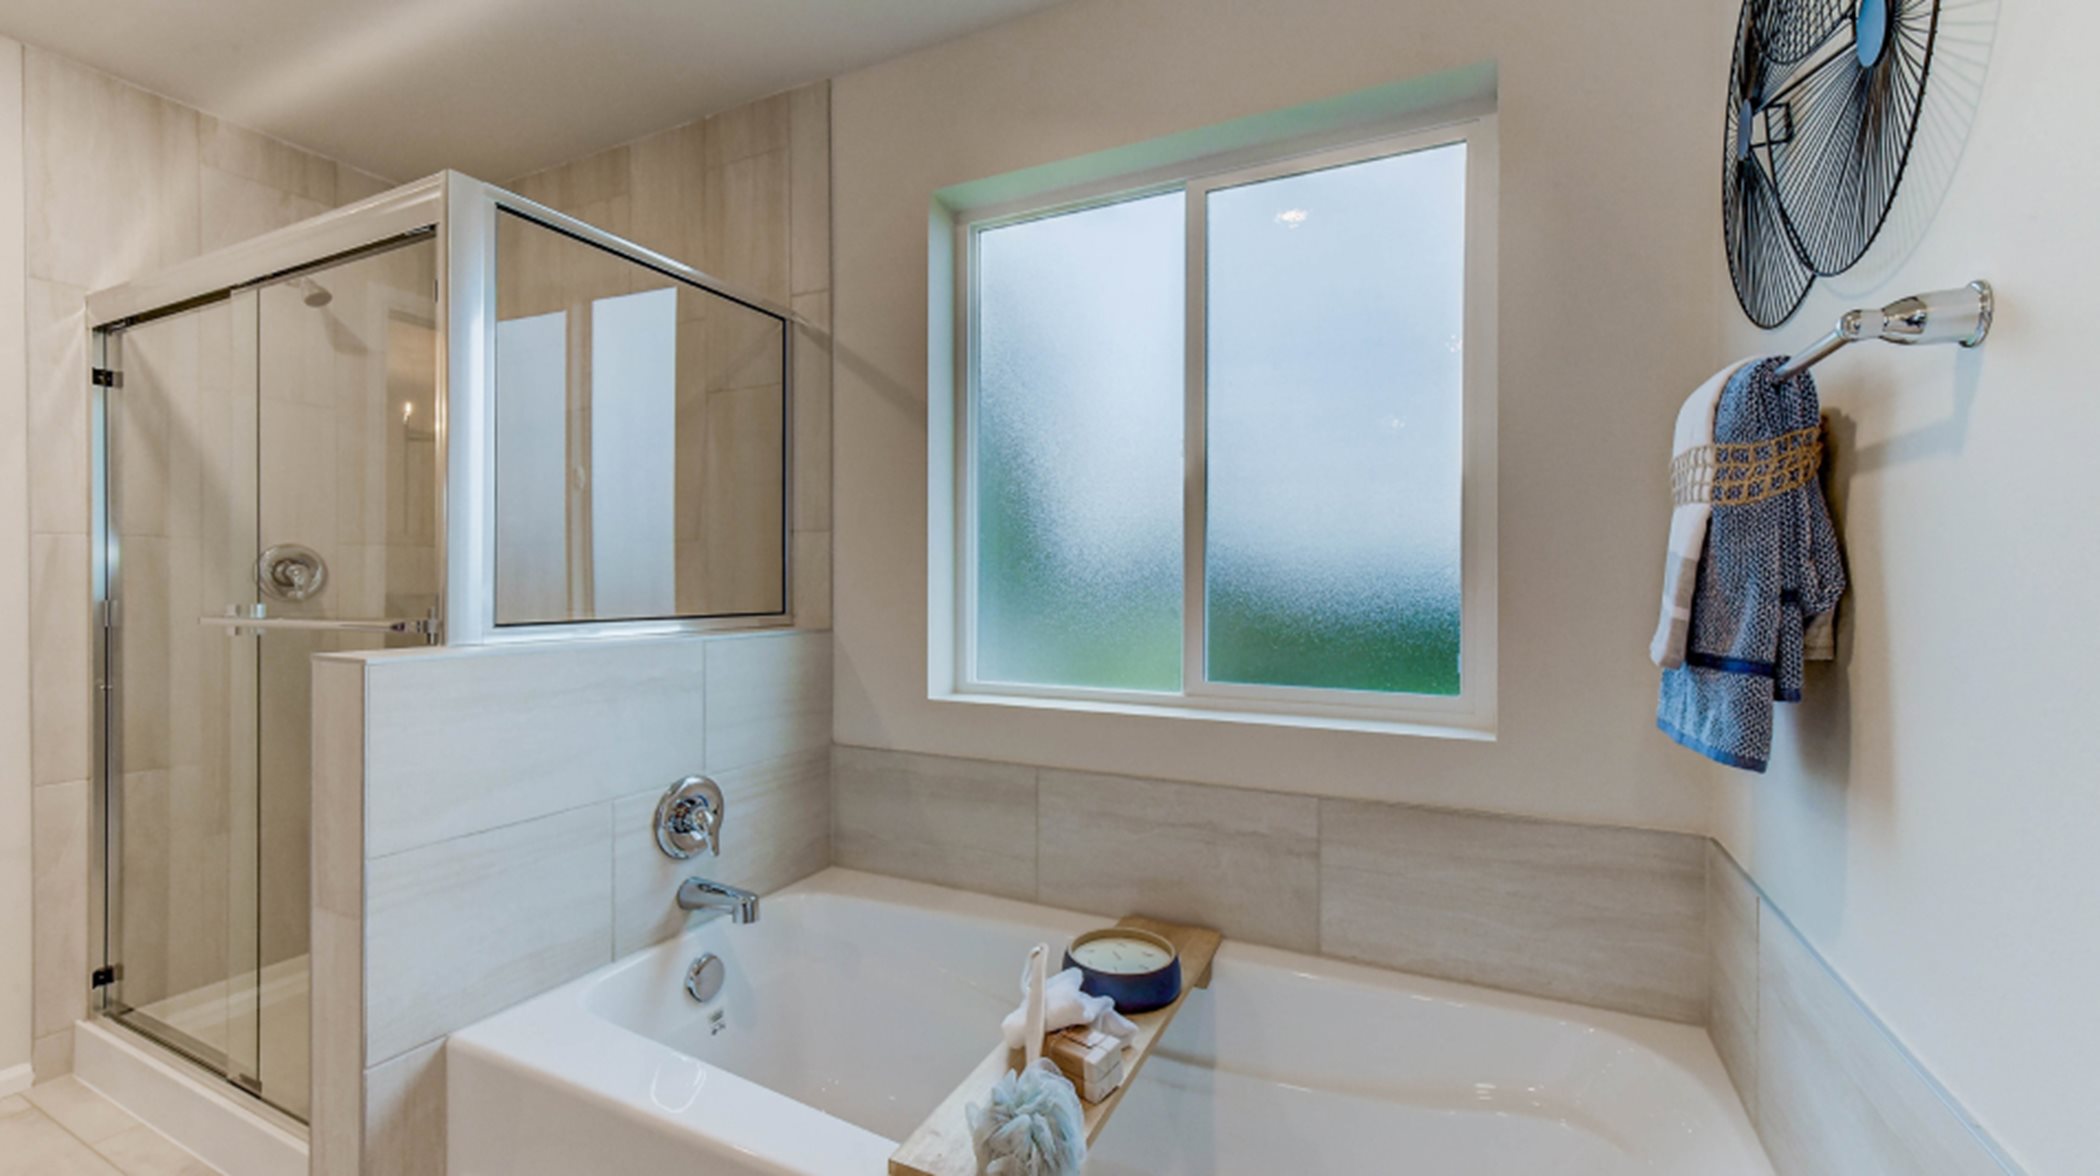 Soaking tub next to the glass enclosed shower